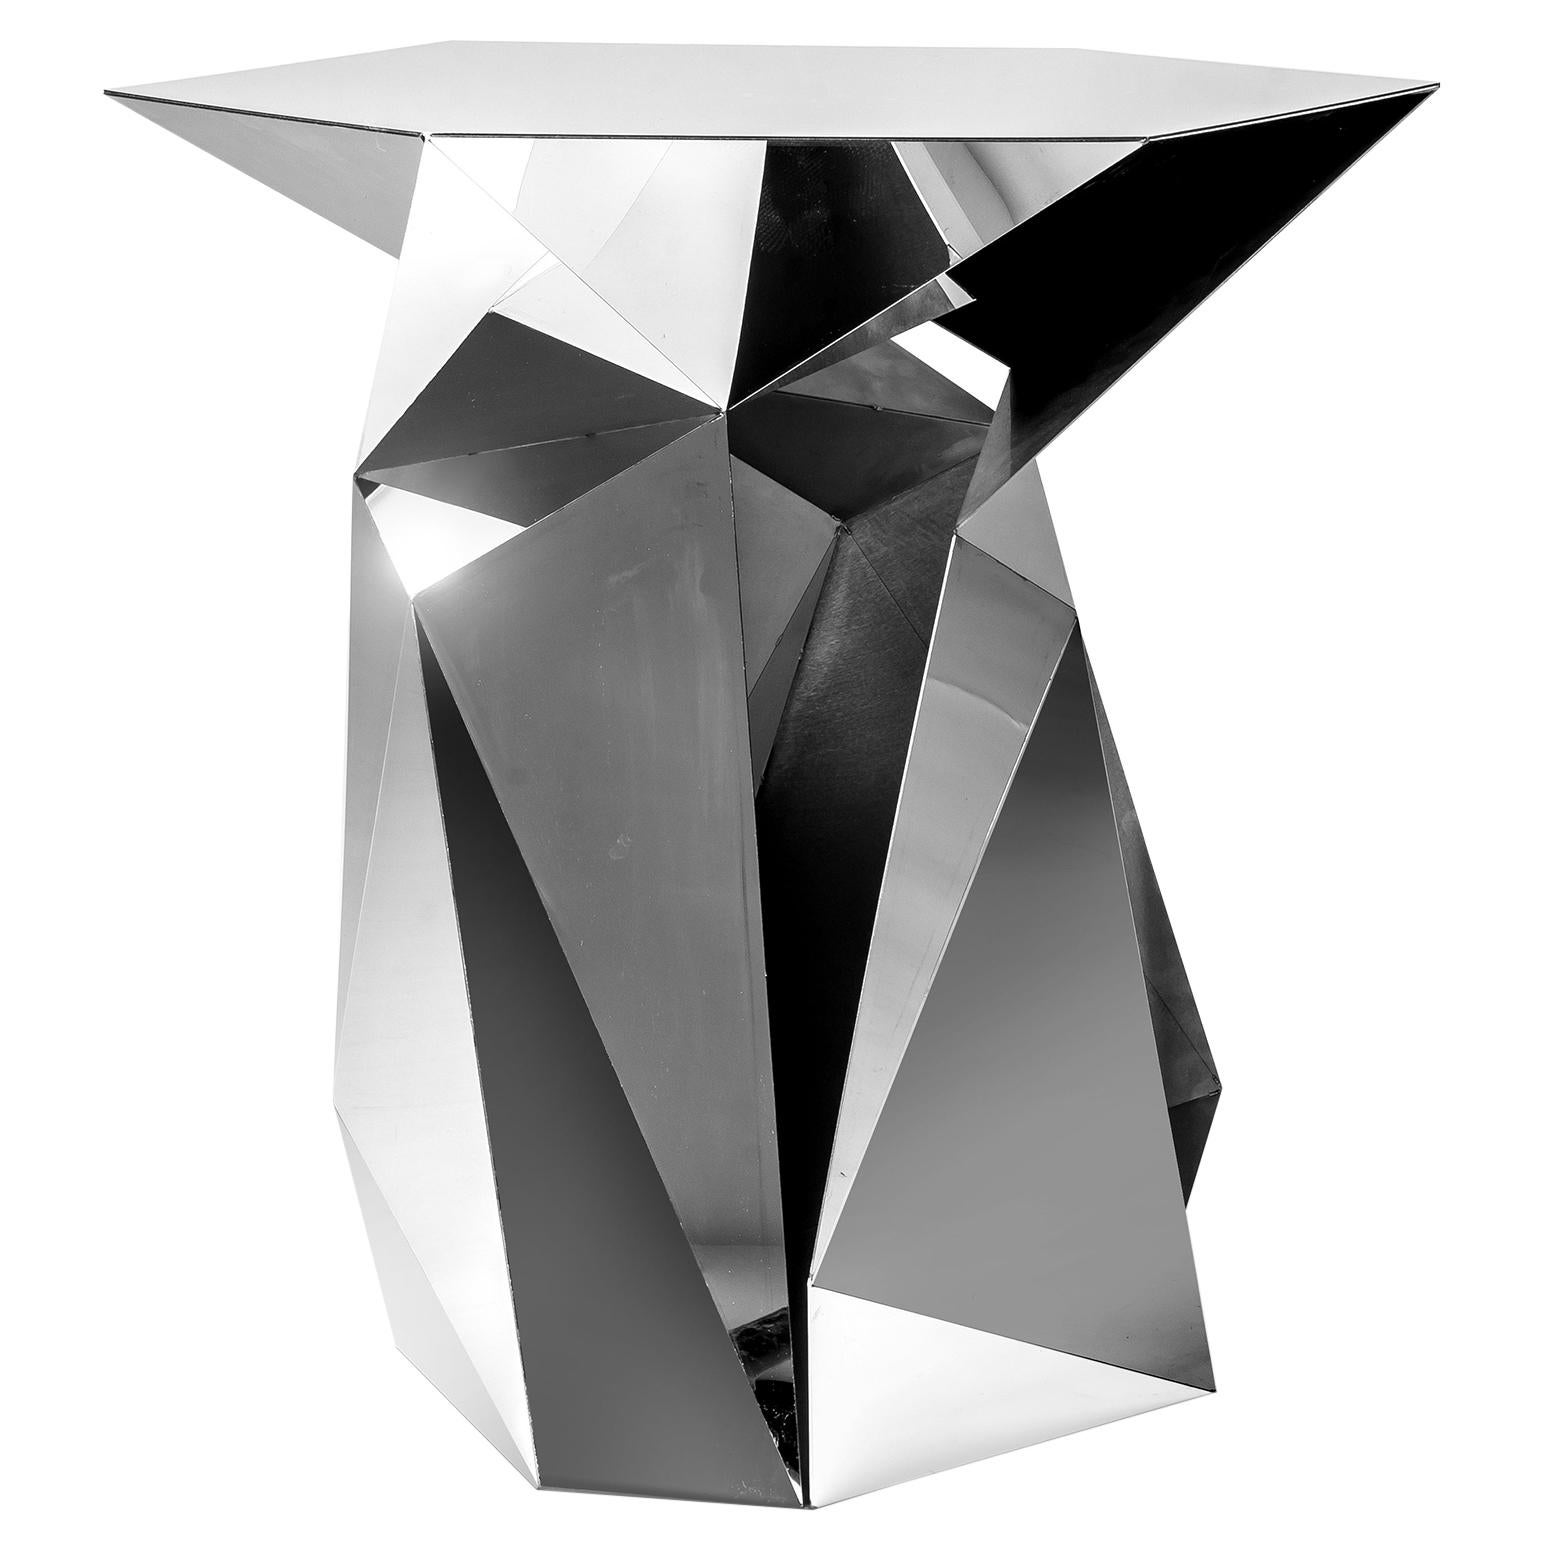 Object #MT-T7-S-S Mirror Polished Stainless Steel Side Table by Zhoujie Zhang